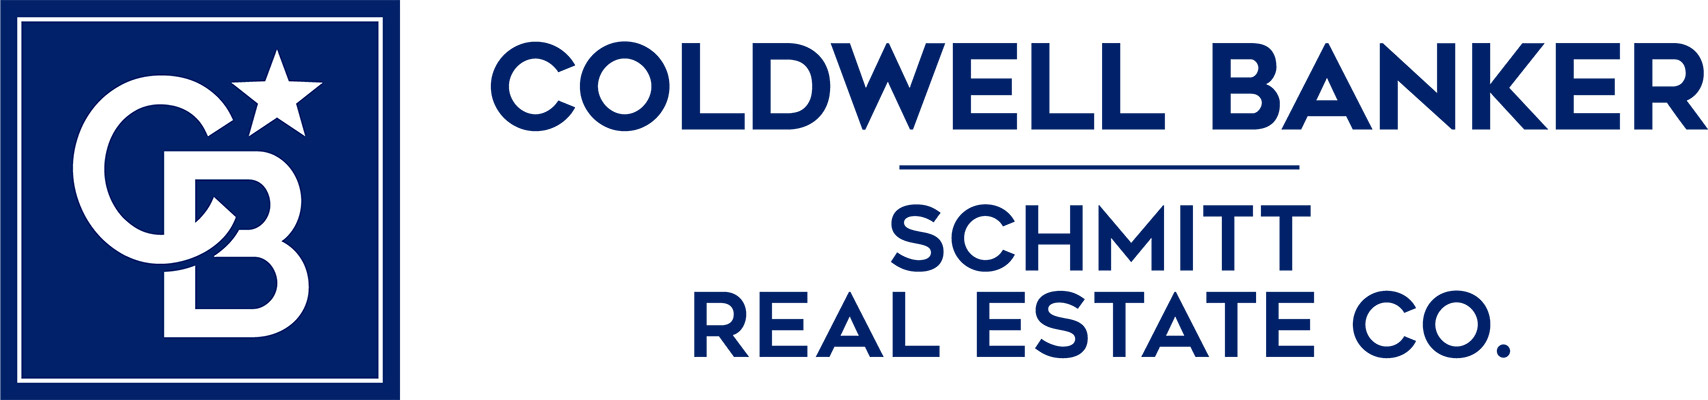 Mary Herbenick - Coldwell Banker Logo